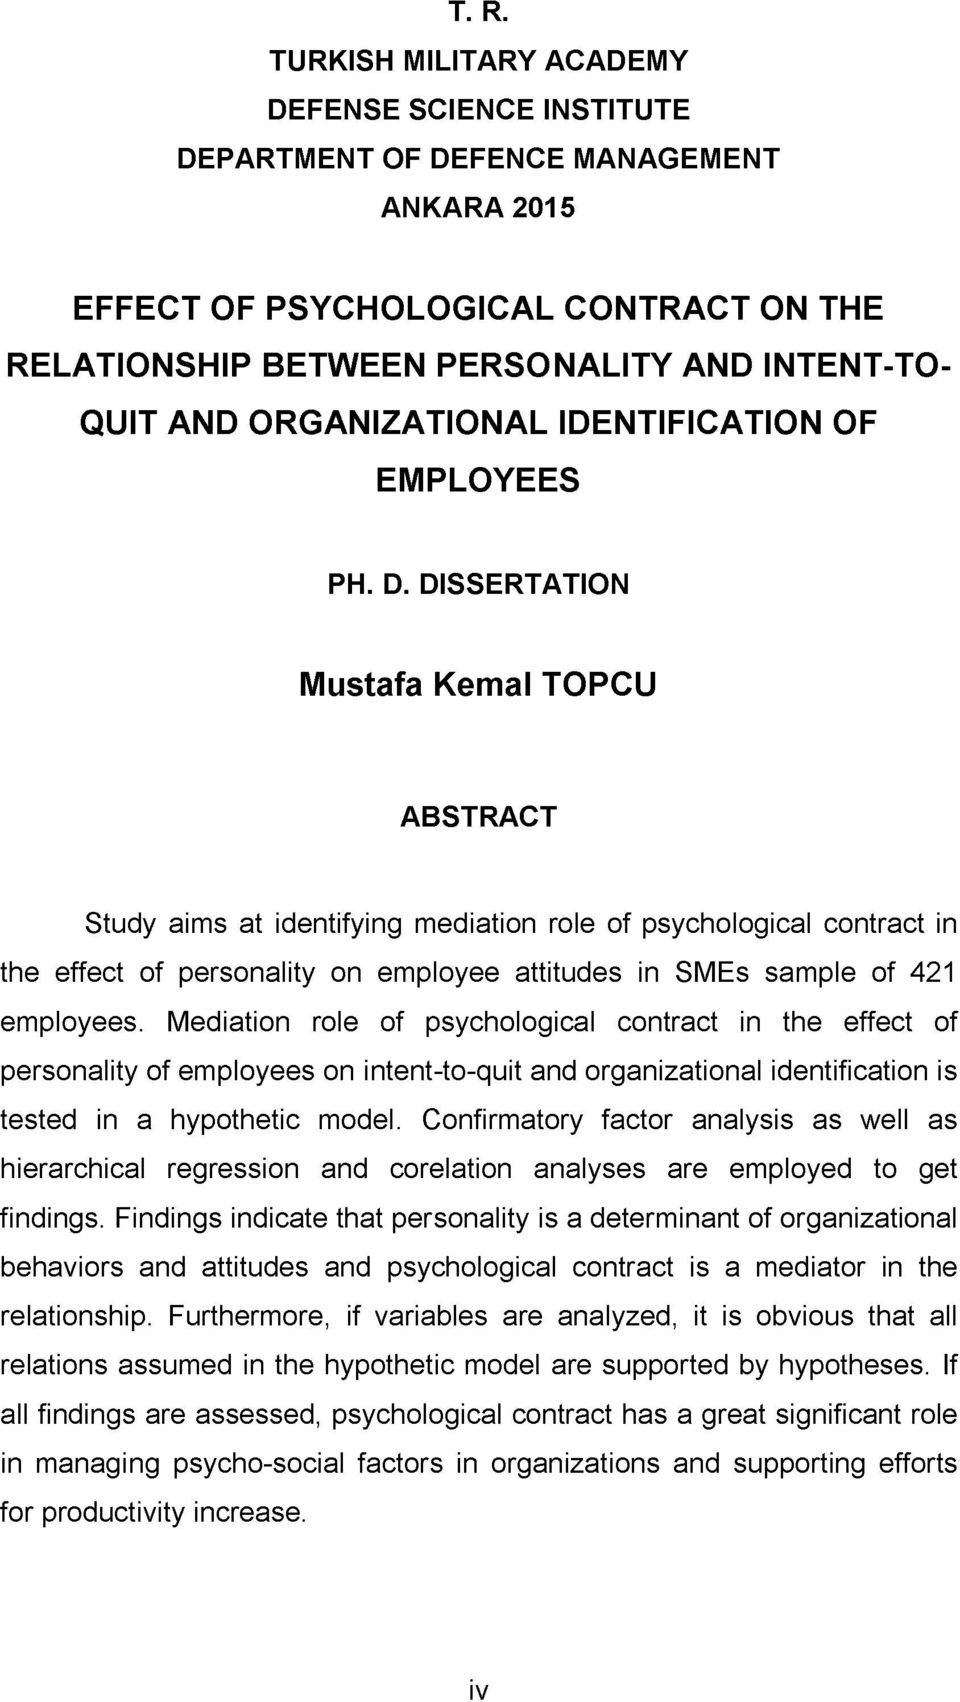 DISSERTATION Mustafa Kemal TOPCU ABSTRACT Study aims at identifying mediation role of psychological contract in the effect of personality on employee attitudes in SMEs sample of 421 employees.